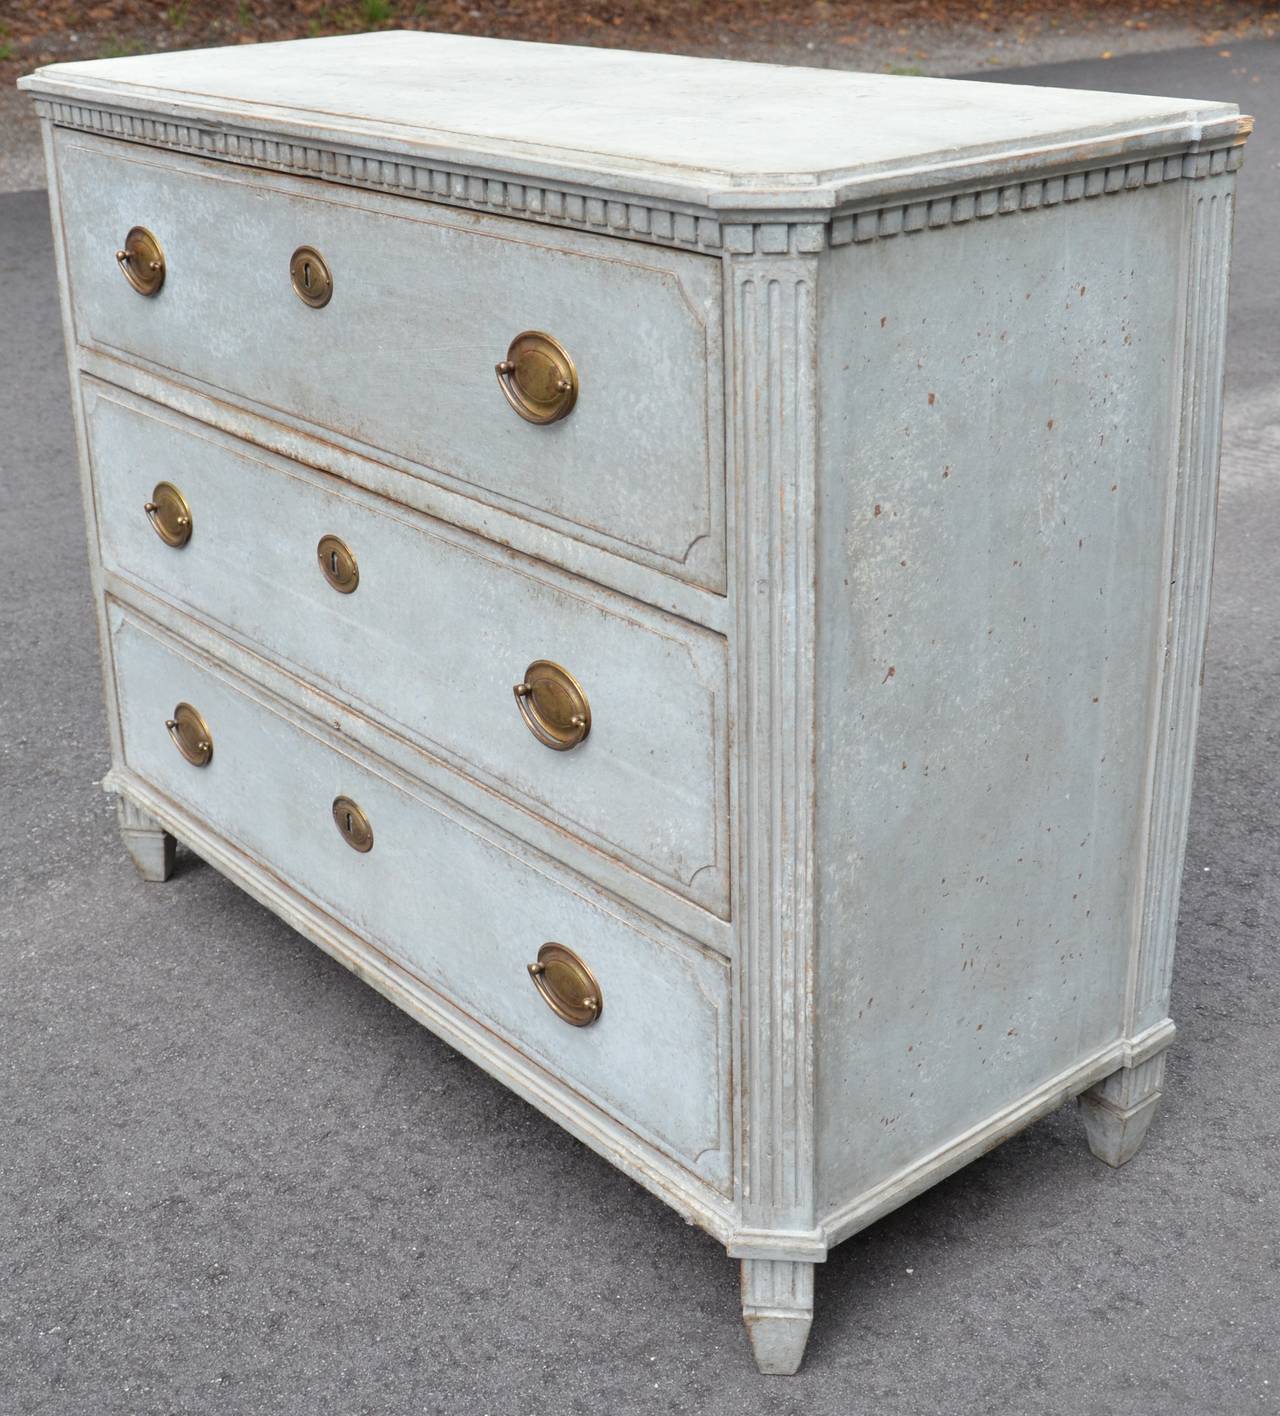 19th century Swedish Gustavian period chest with handsome brass hardware, dentil molding under the shaped top, canted corners and tapered feed in beautiful greenish blue patina.
Sweden, circa 1810.